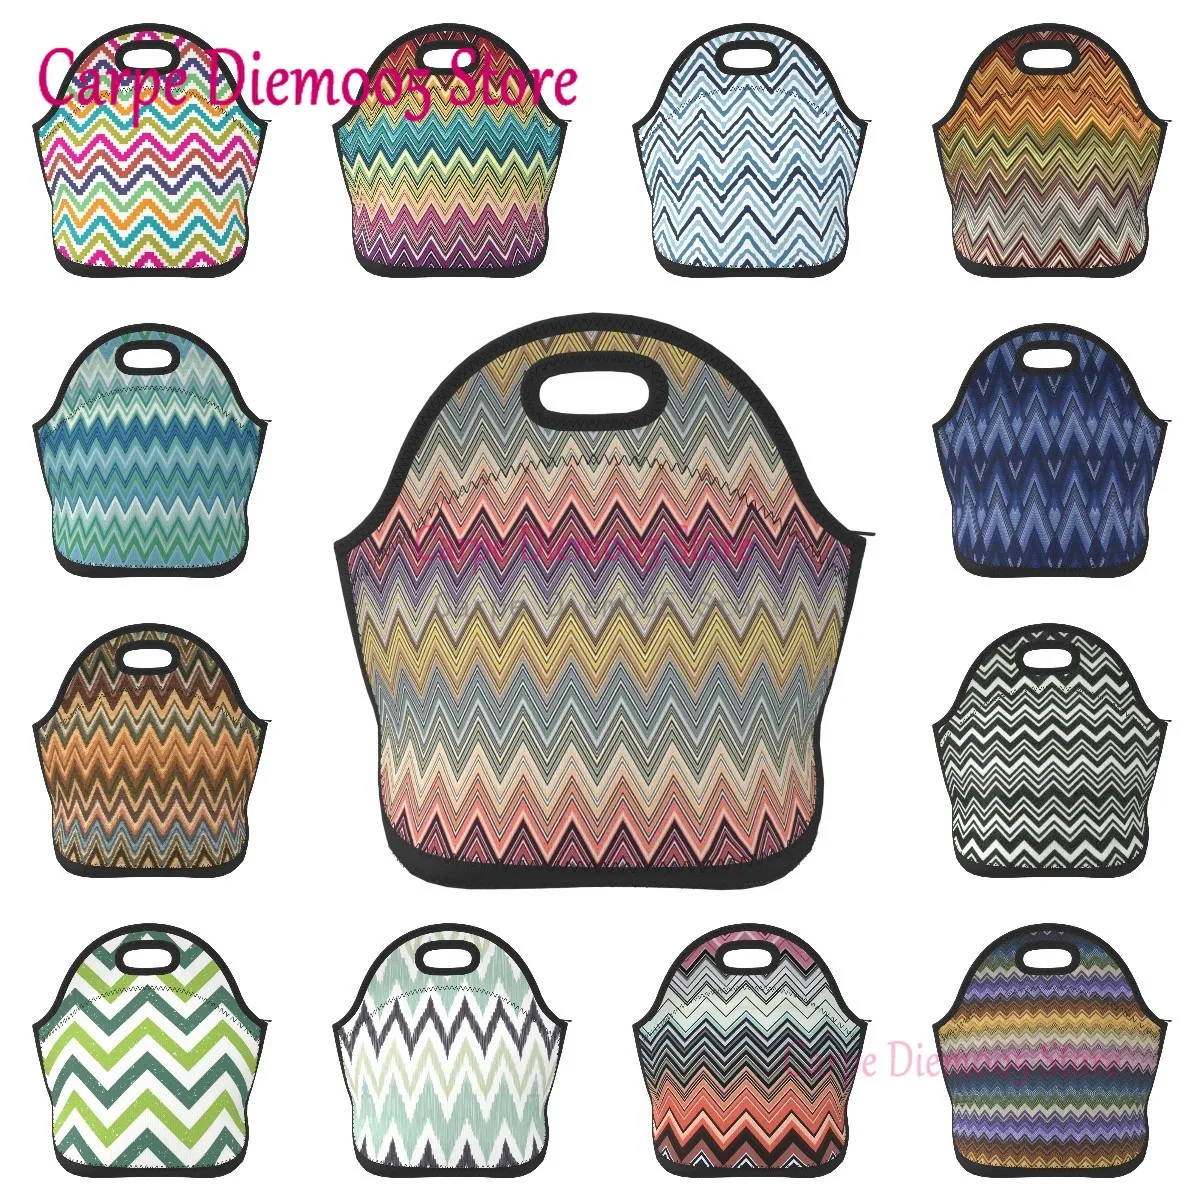 

Zigzag Lines,Soft Neoprene Lunch Tote Bag Tribal Zigzag Lightweight,Insulated and Reusable for Work/School/Travel/Picnic